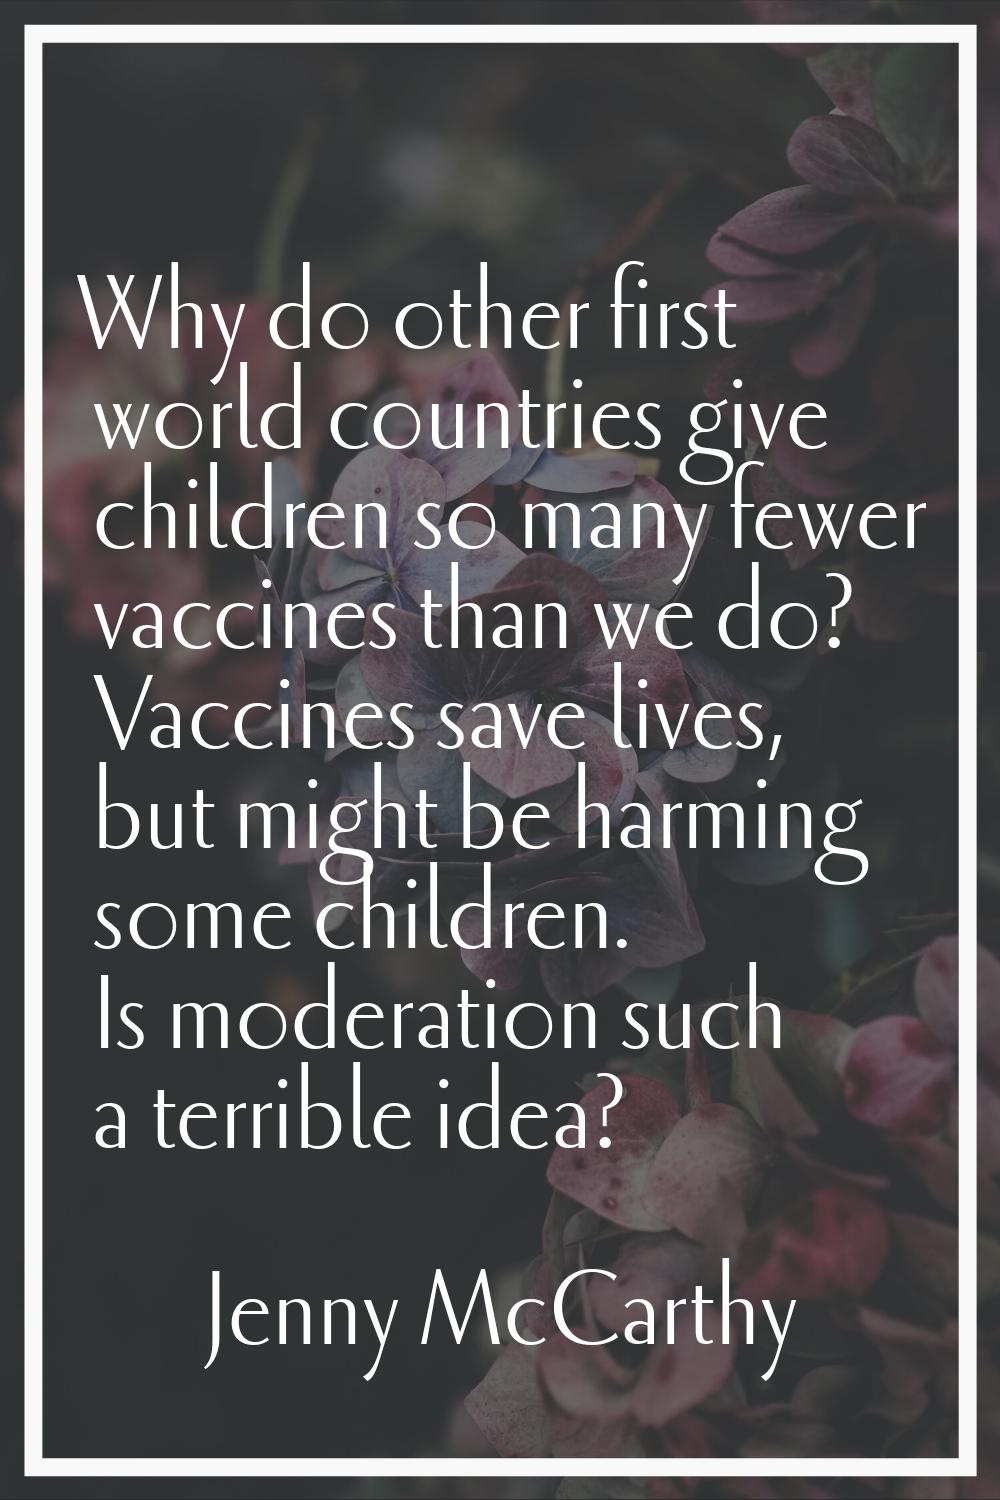 Why do other first world countries give children so many fewer vaccines than we do? Vaccines save l